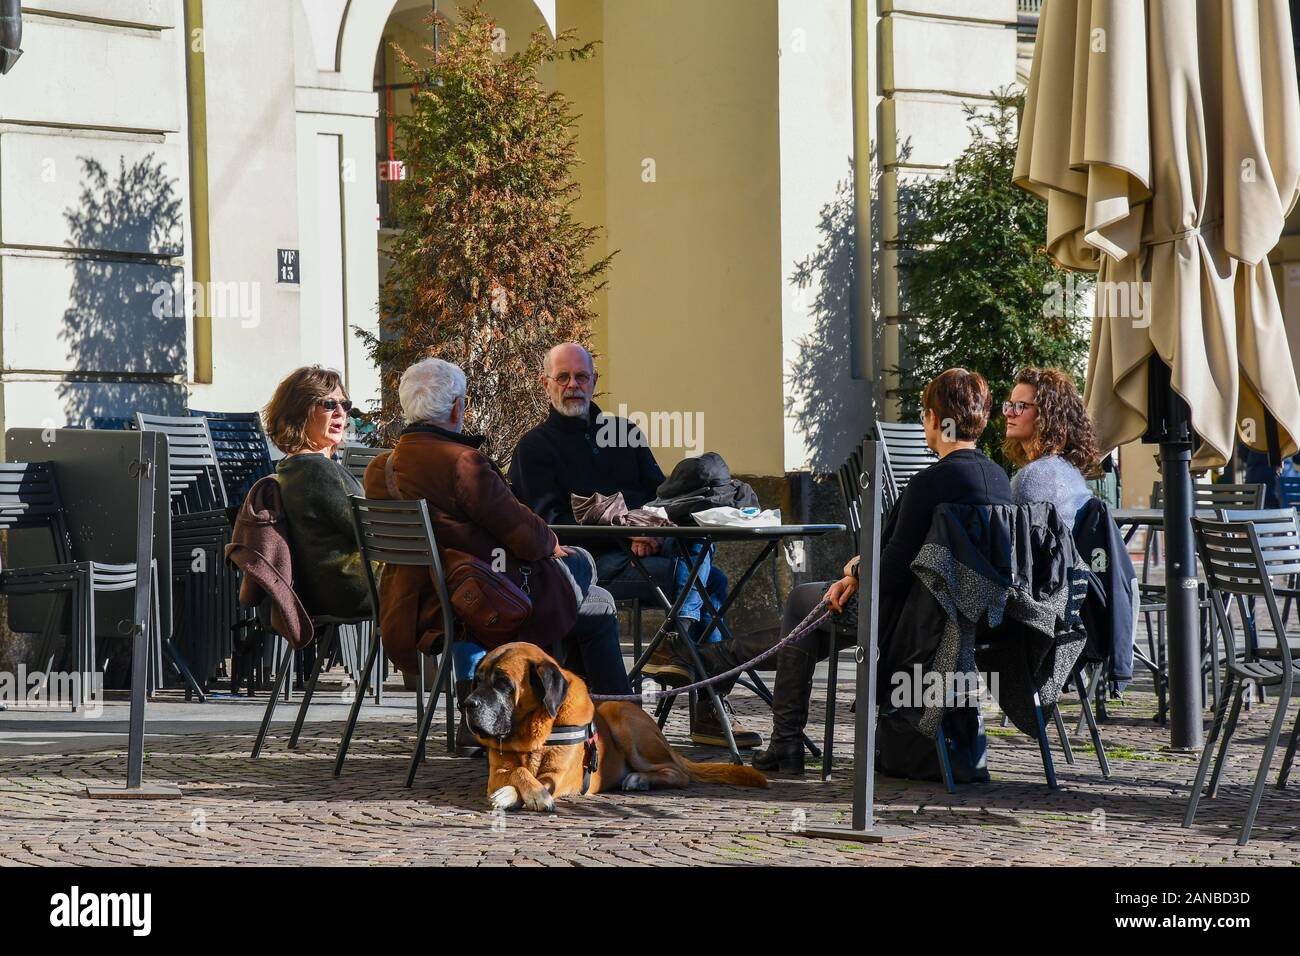 A family with a Bullmastiff dog sitting in an outdoor café in a sunny winter day in the historic centre of Turin, Piedmont, Italy Stock Photo